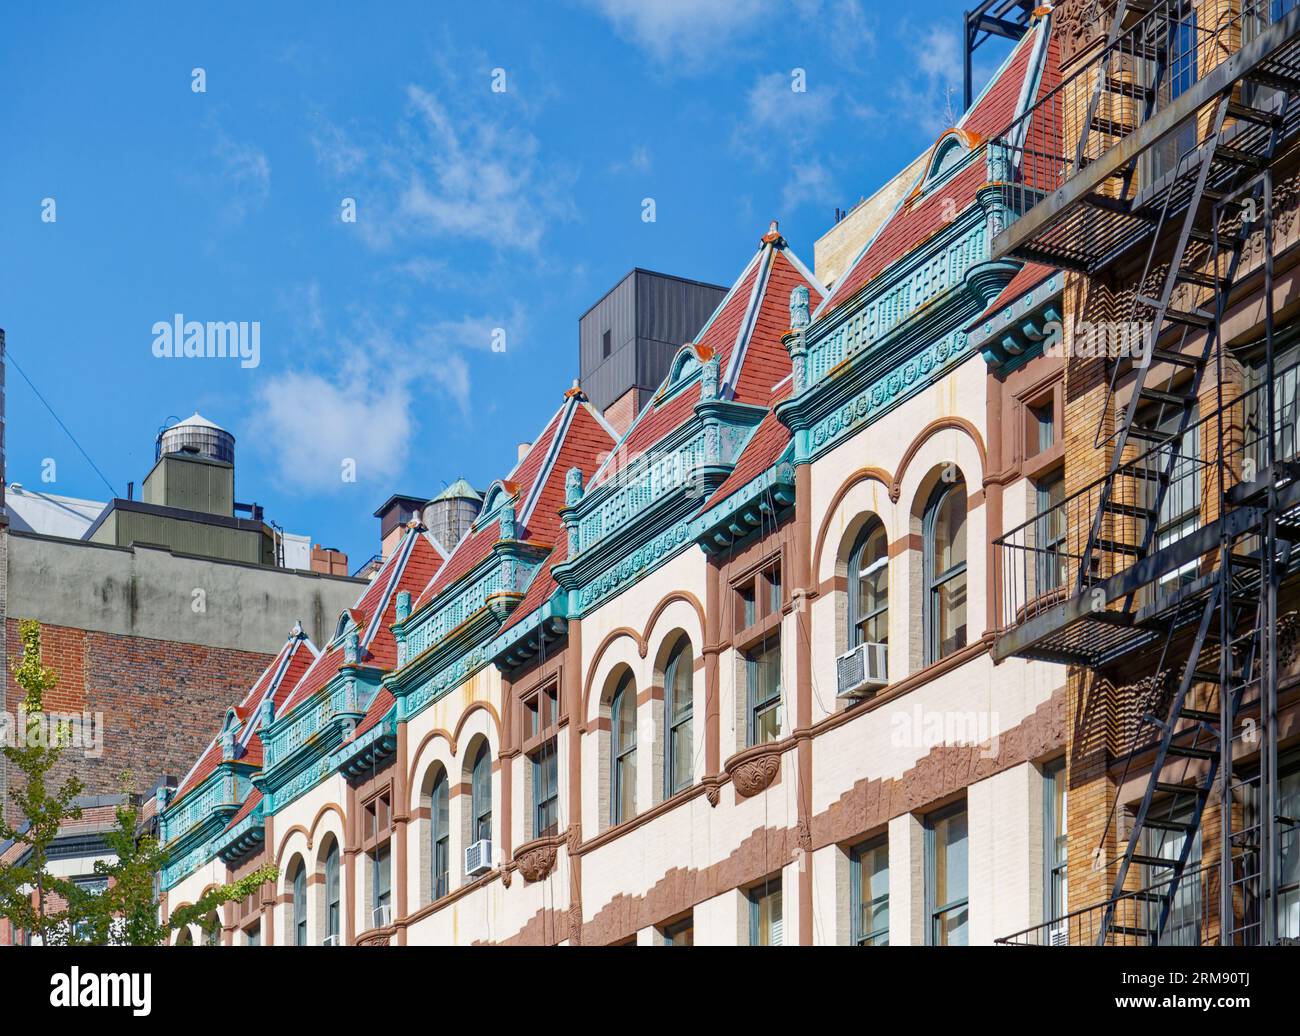 Upper West Side: A fanciful tile roofline fronts the flat roofs of 337-329 West 85th Street, landmark Queen Anne-styled row houses built in 1891. Stock Photo